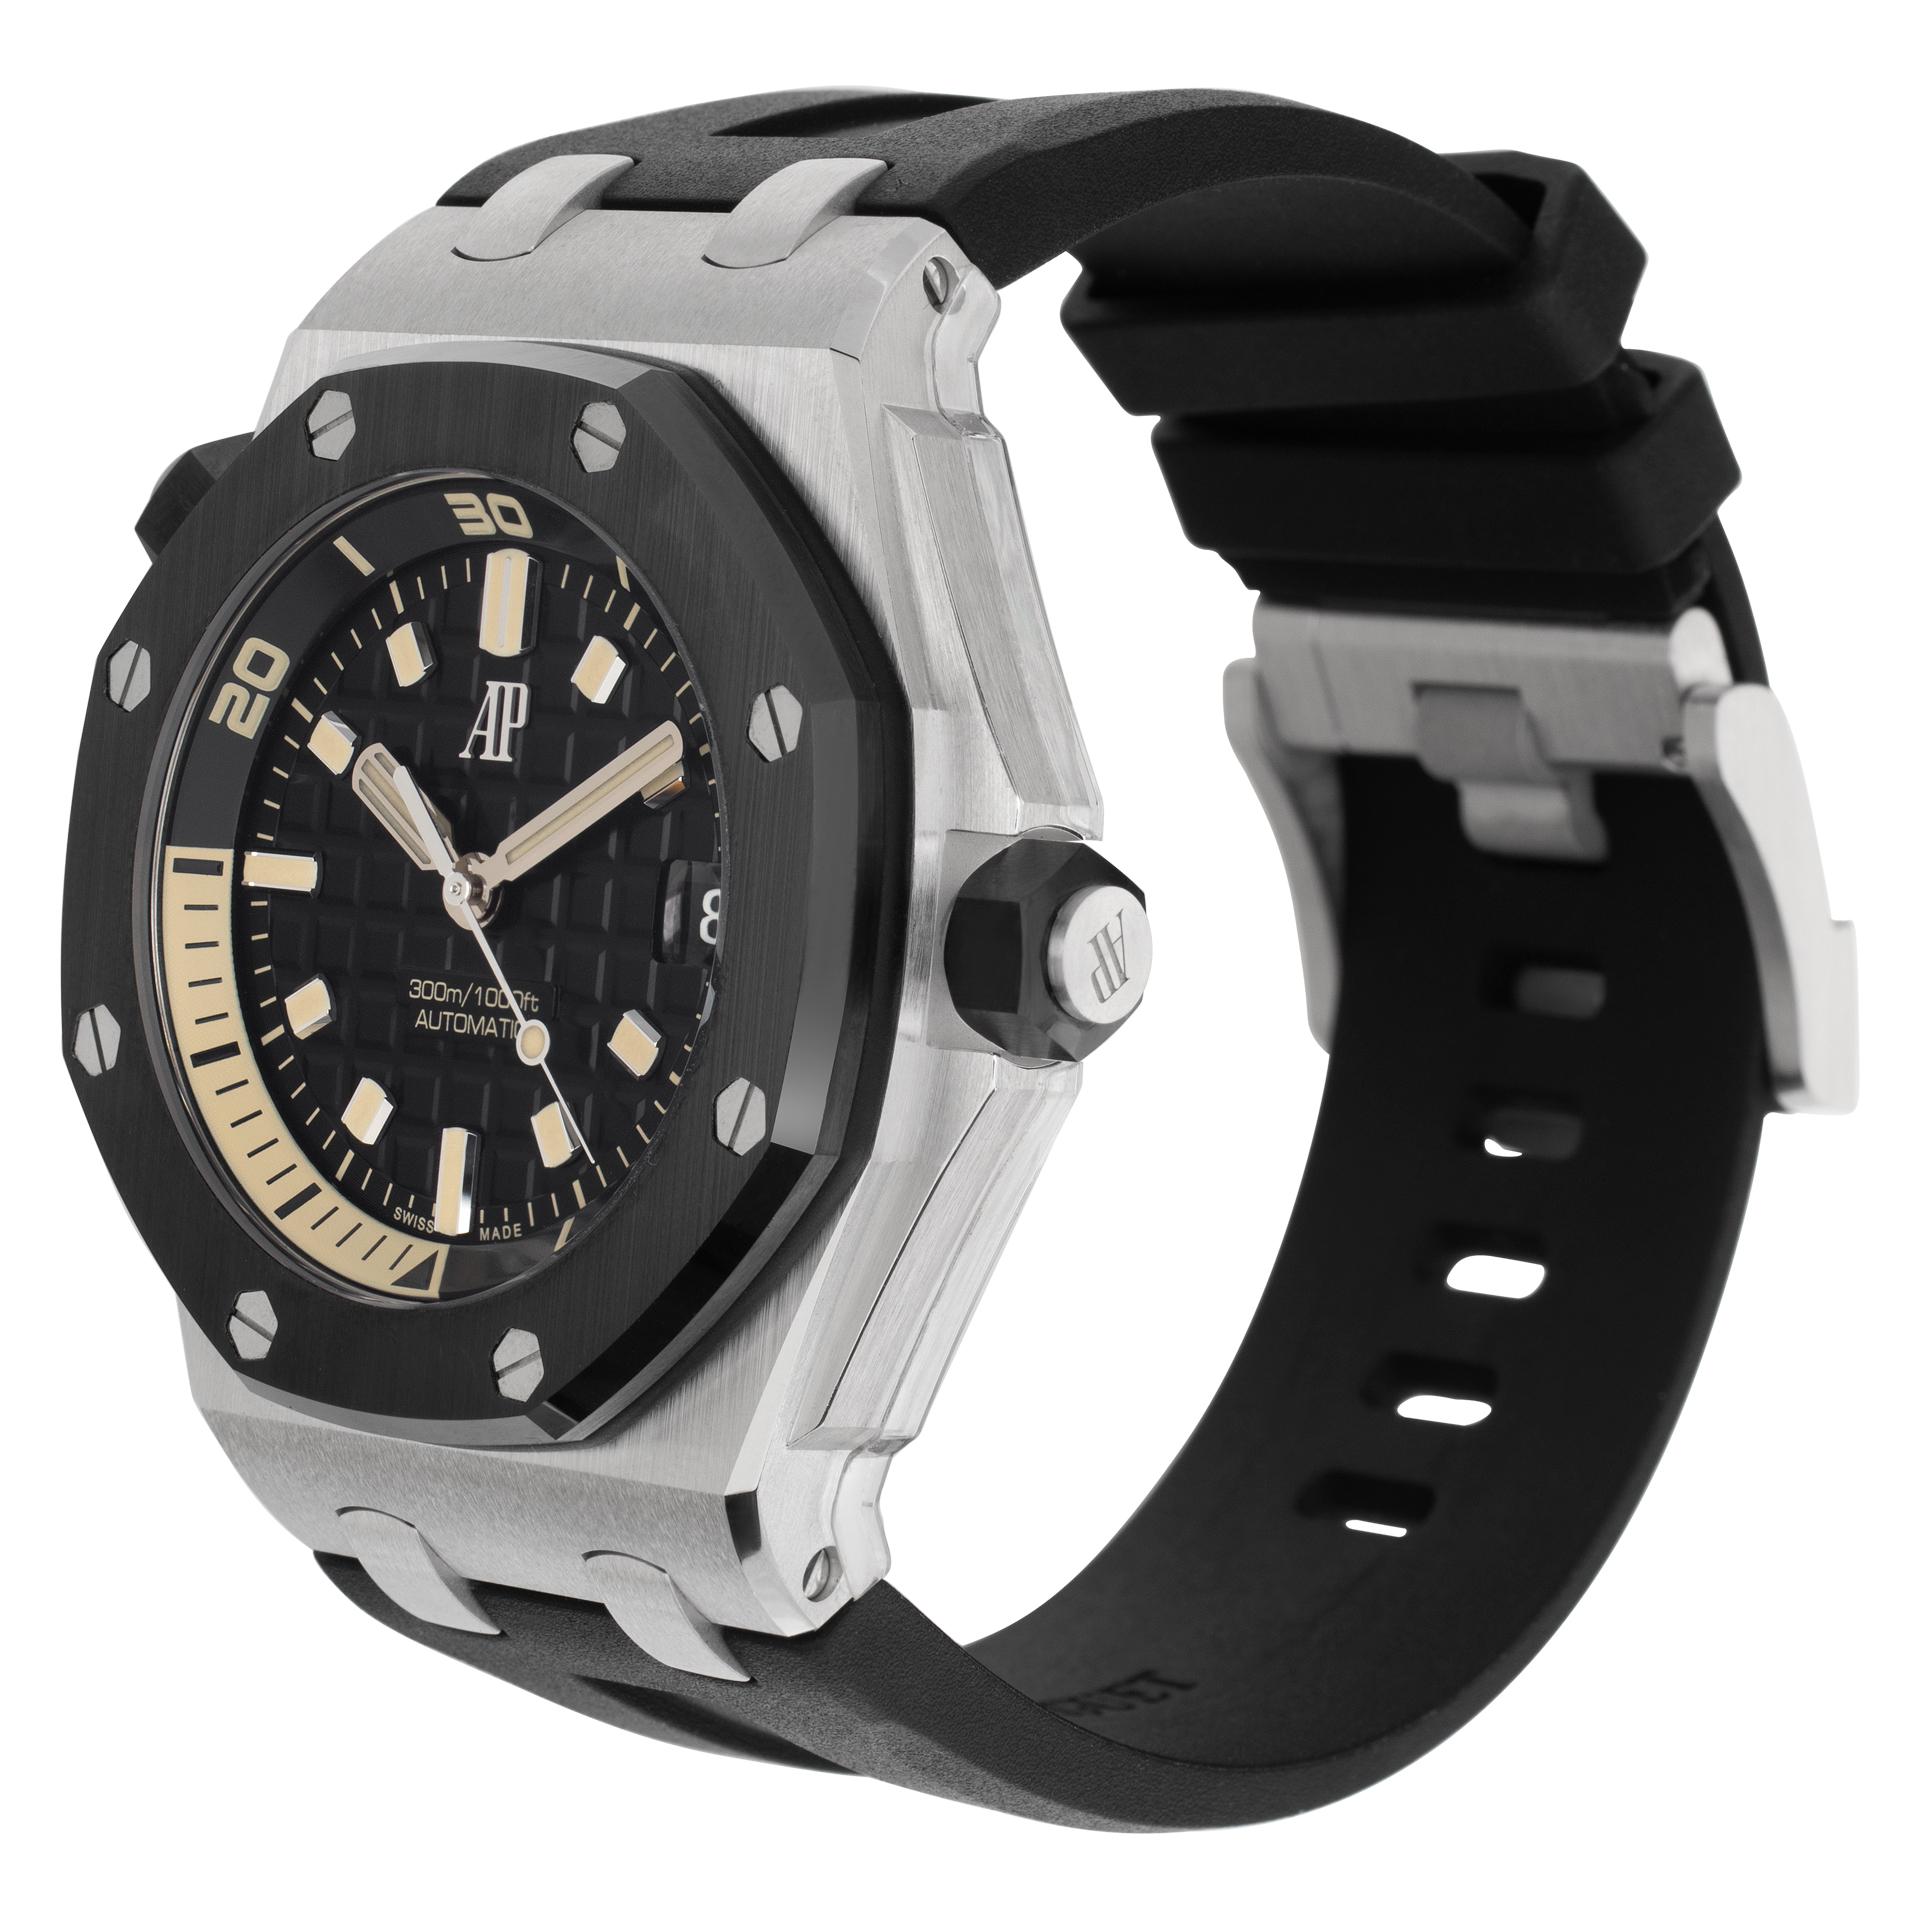 NEW 2021!!! Audemars Piguet Royal Oak Offshore Diver in 18k white gold on black rubber strap with 18k white gold AP tang buckle. Limited edition to 300 watches. Auto w/ sweep seconds and date. 42 mm case size. Unused with box and papers. Ref